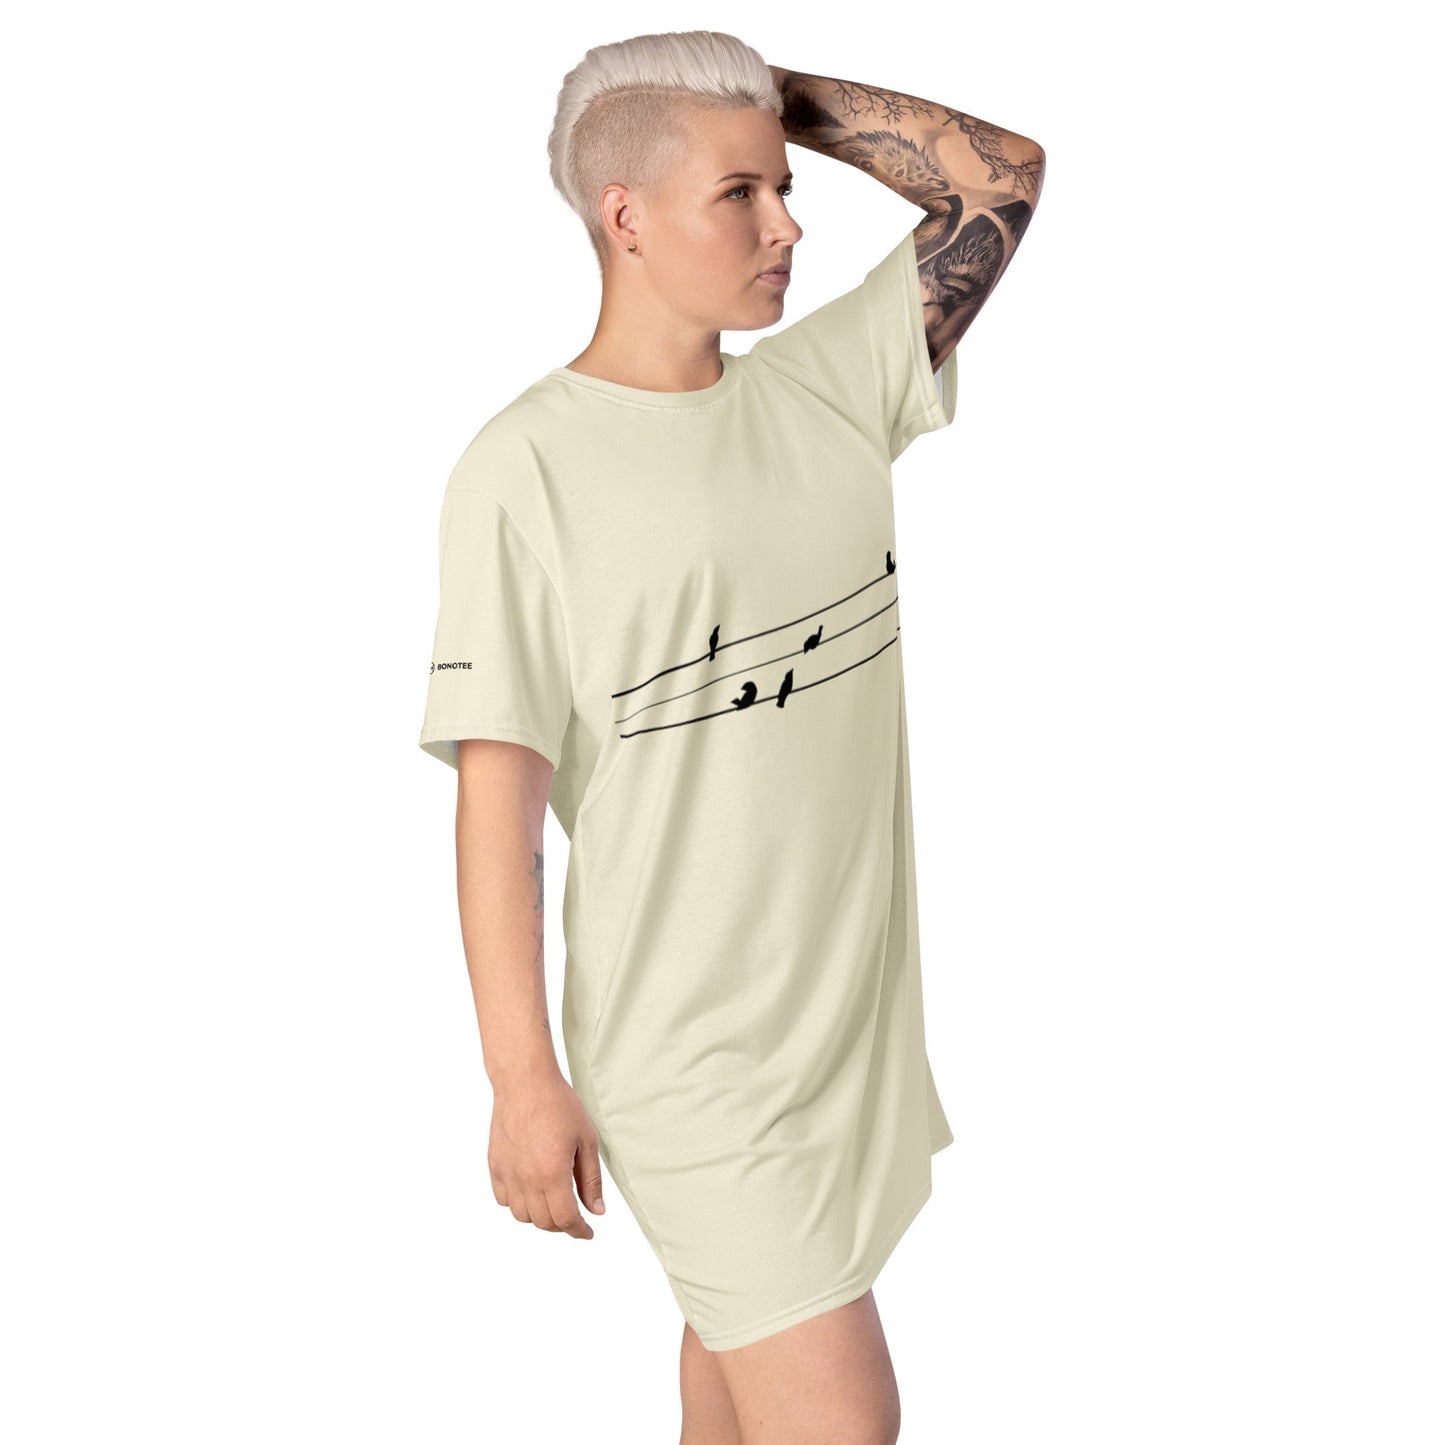 FLY ON THE WALL Women's T - Shirt Dress - BONOTEE